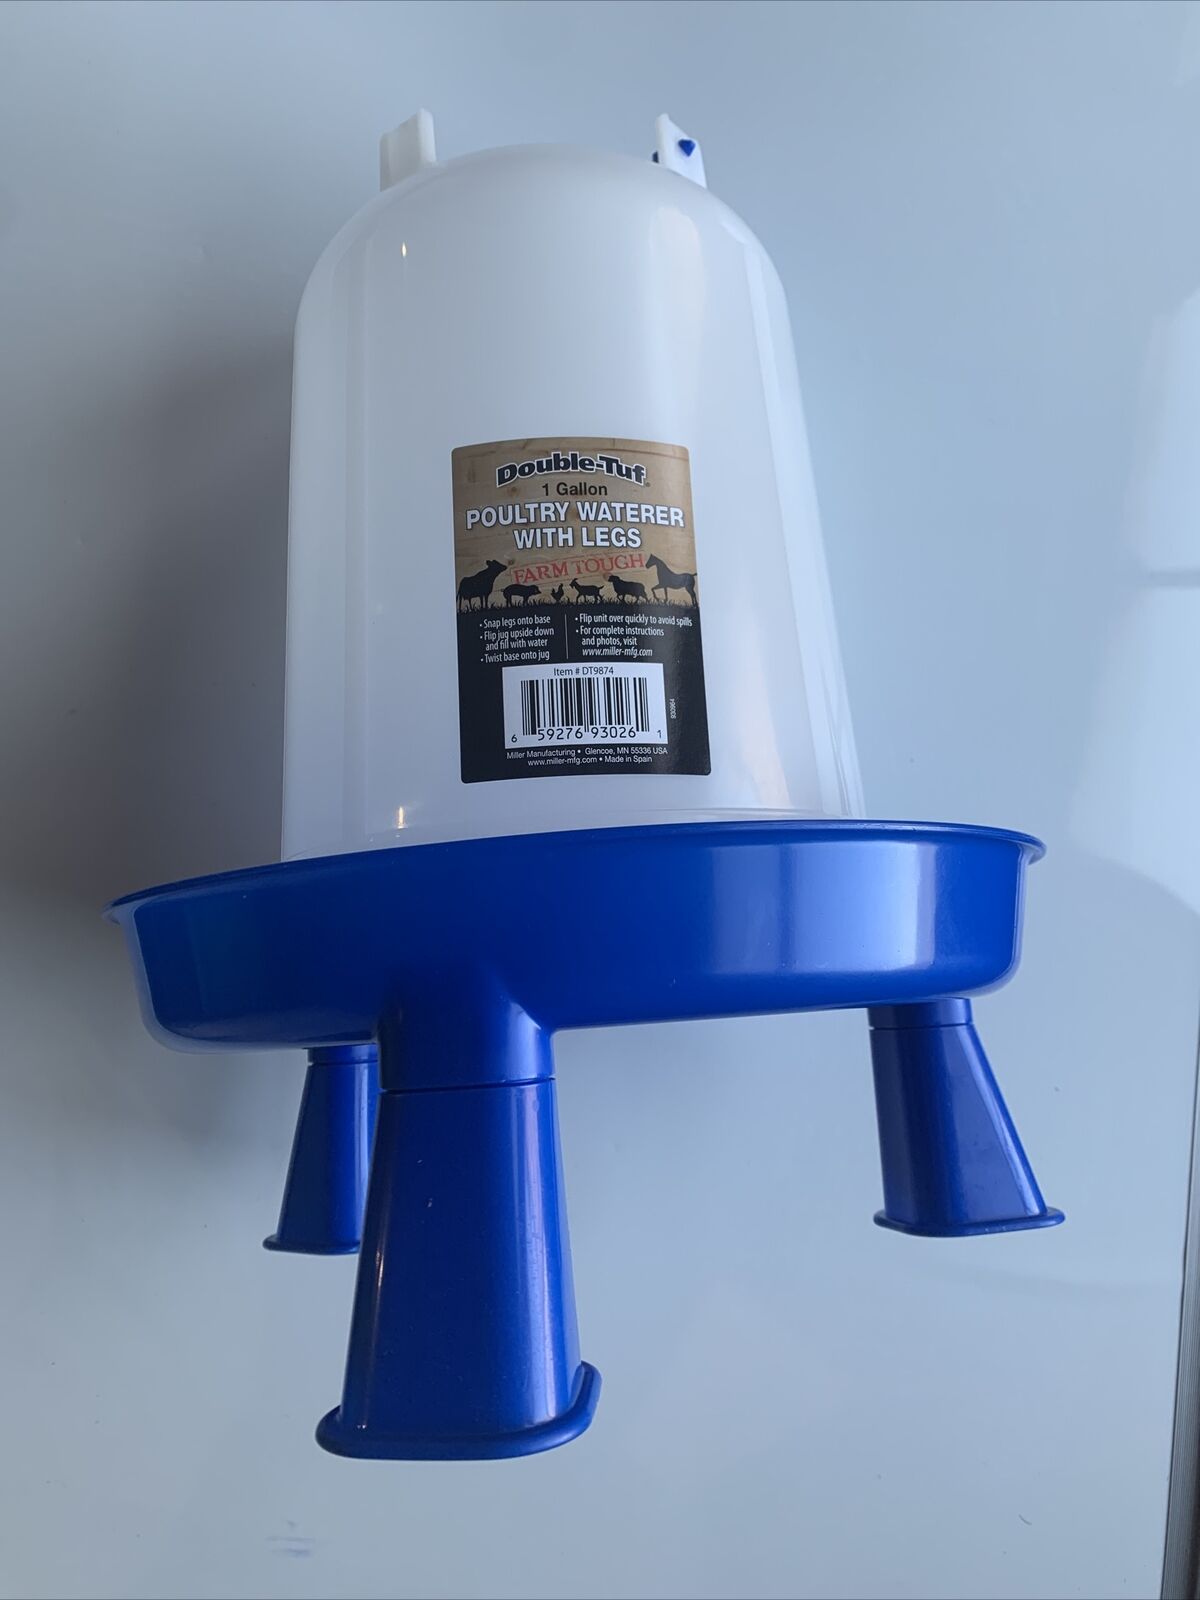 Quality inspection Double-Tuf DT9874 Poultry 1 Max 47% OFF Gallon With Waterer Removable Legs